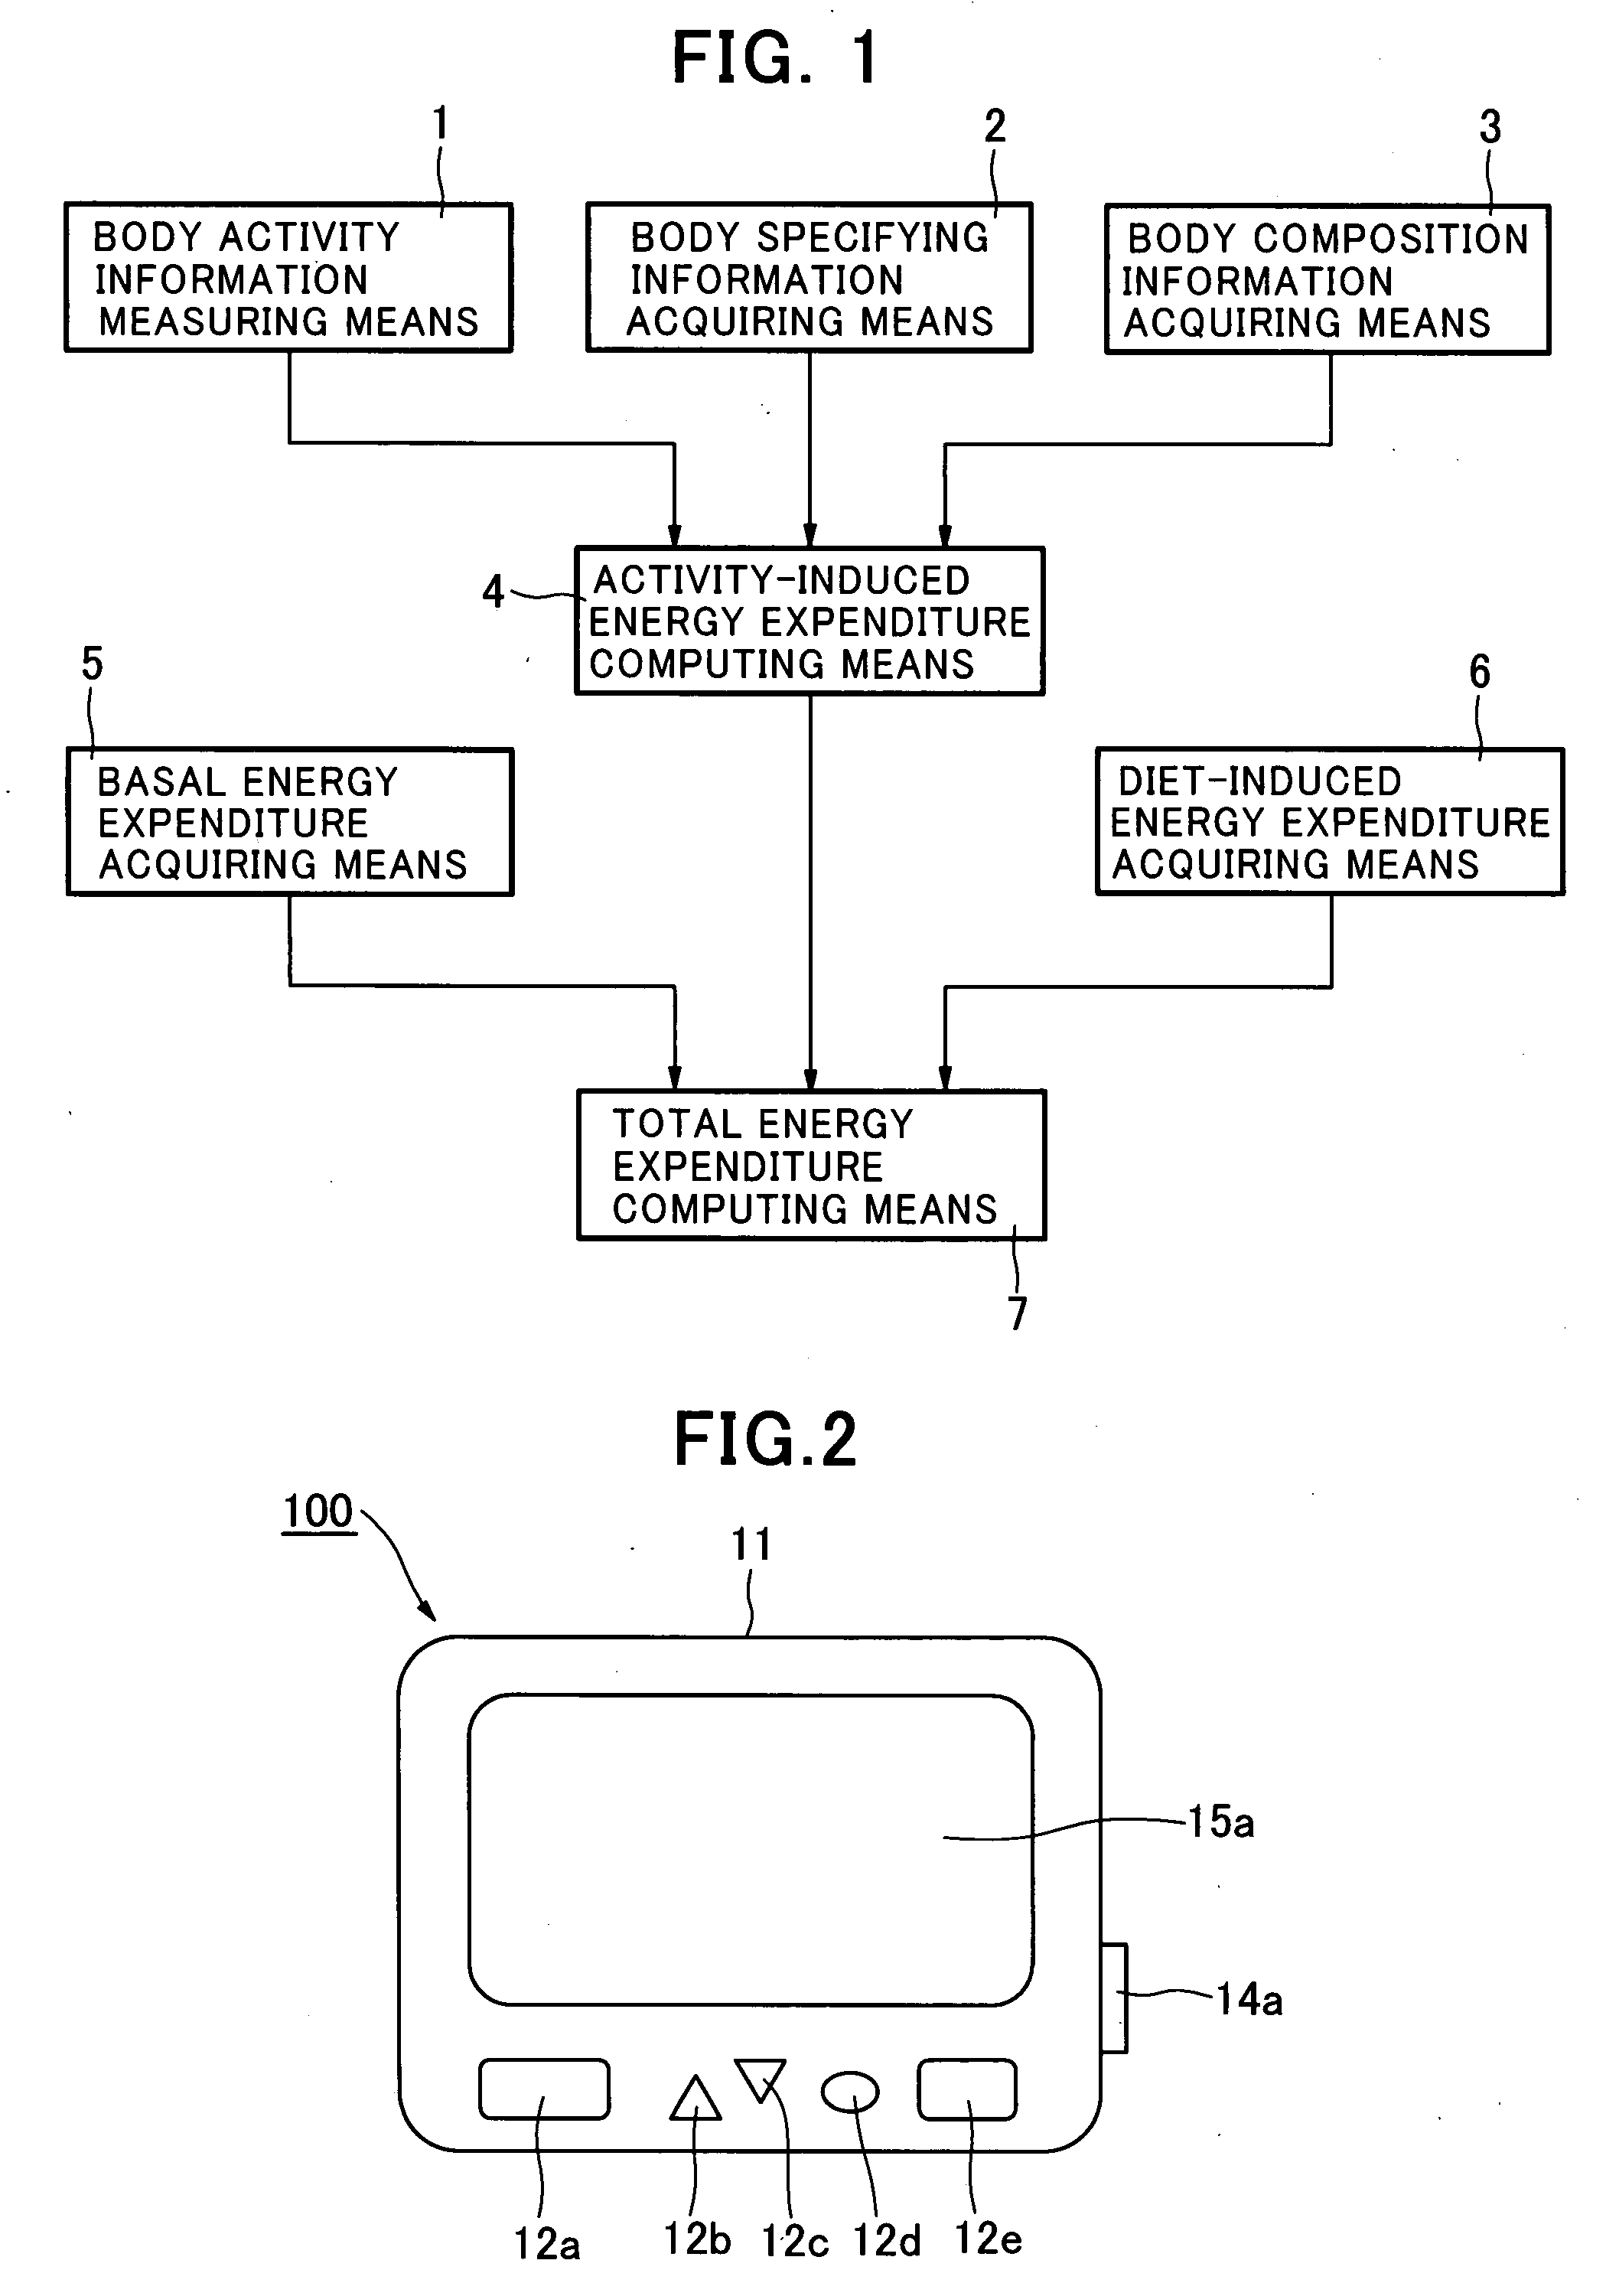 Activity-induced energy expenditure estimating instrument